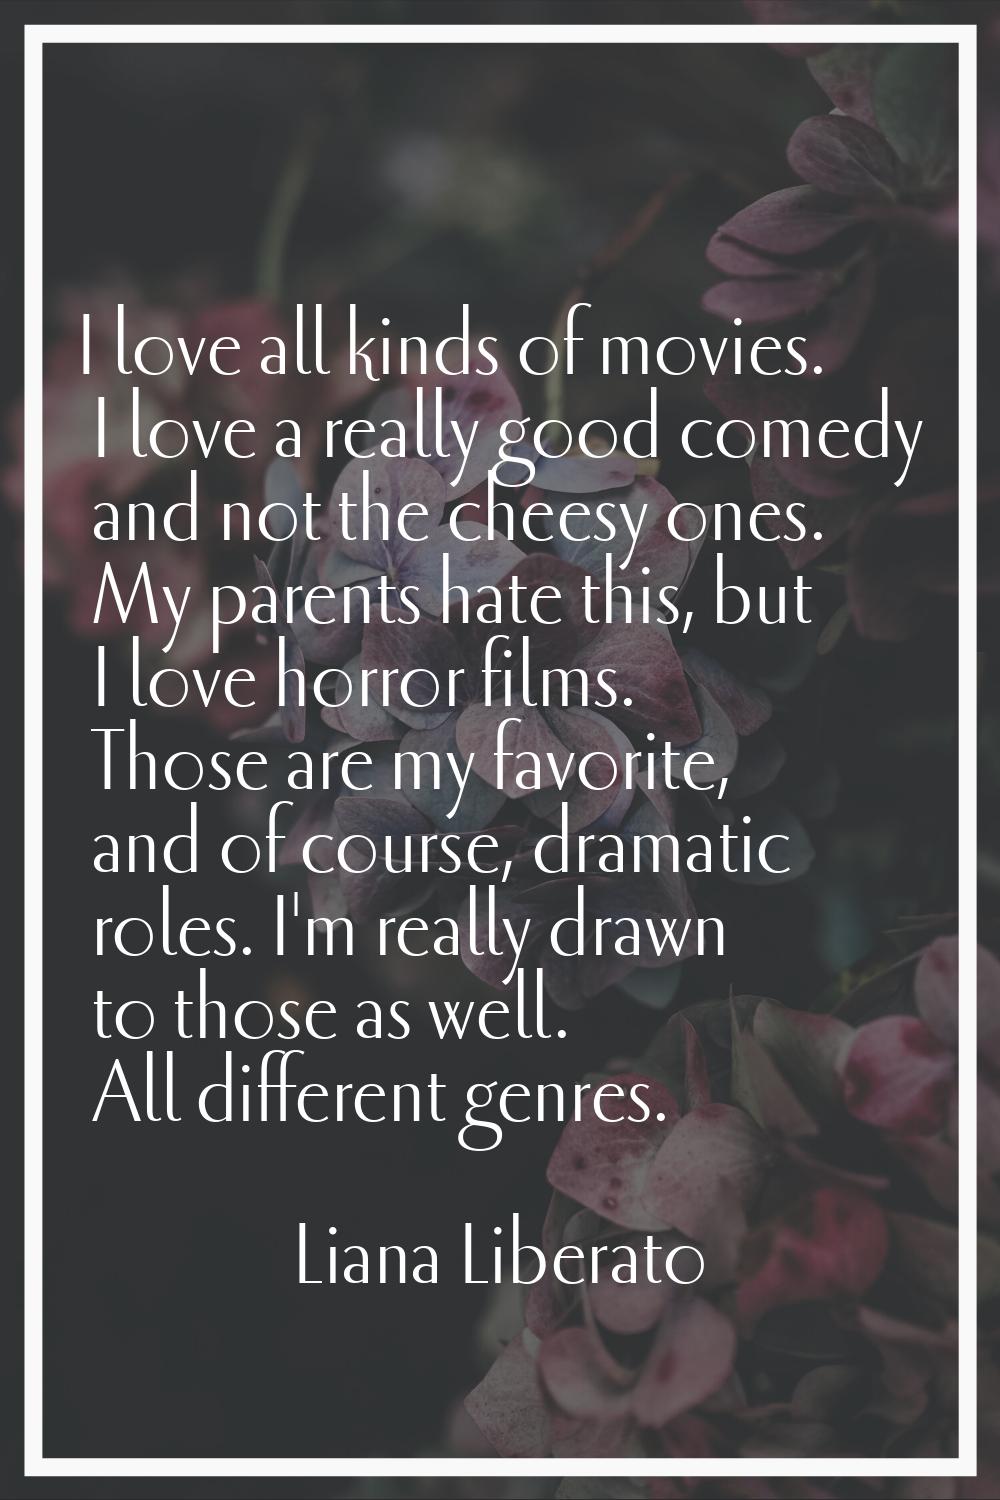 I love all kinds of movies. I love a really good comedy and not the cheesy ones. My parents hate th